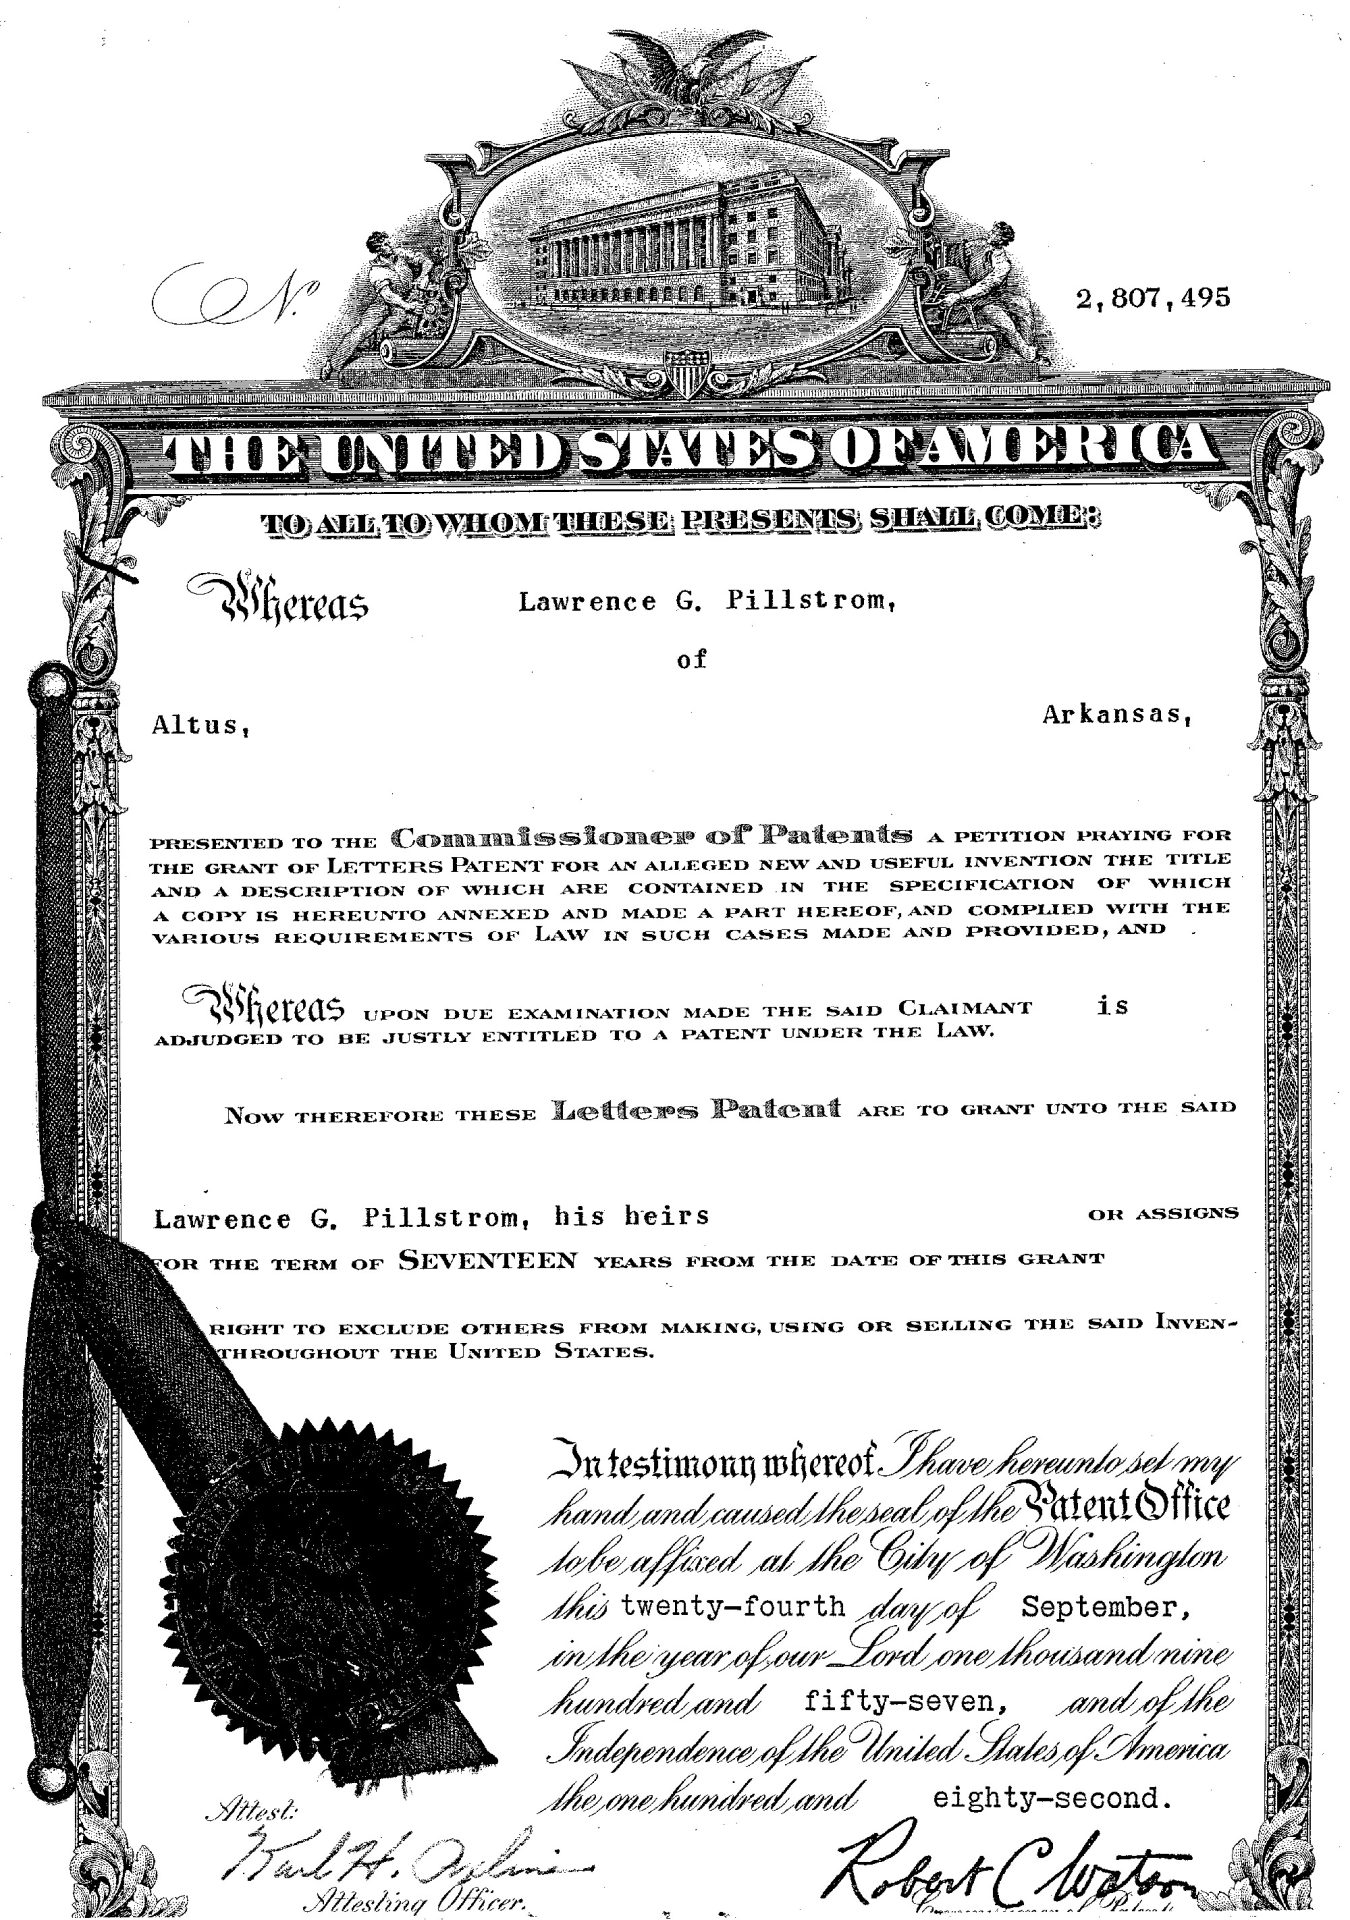 Official patent certificate for "Lawrence G. Phillips of Altus"